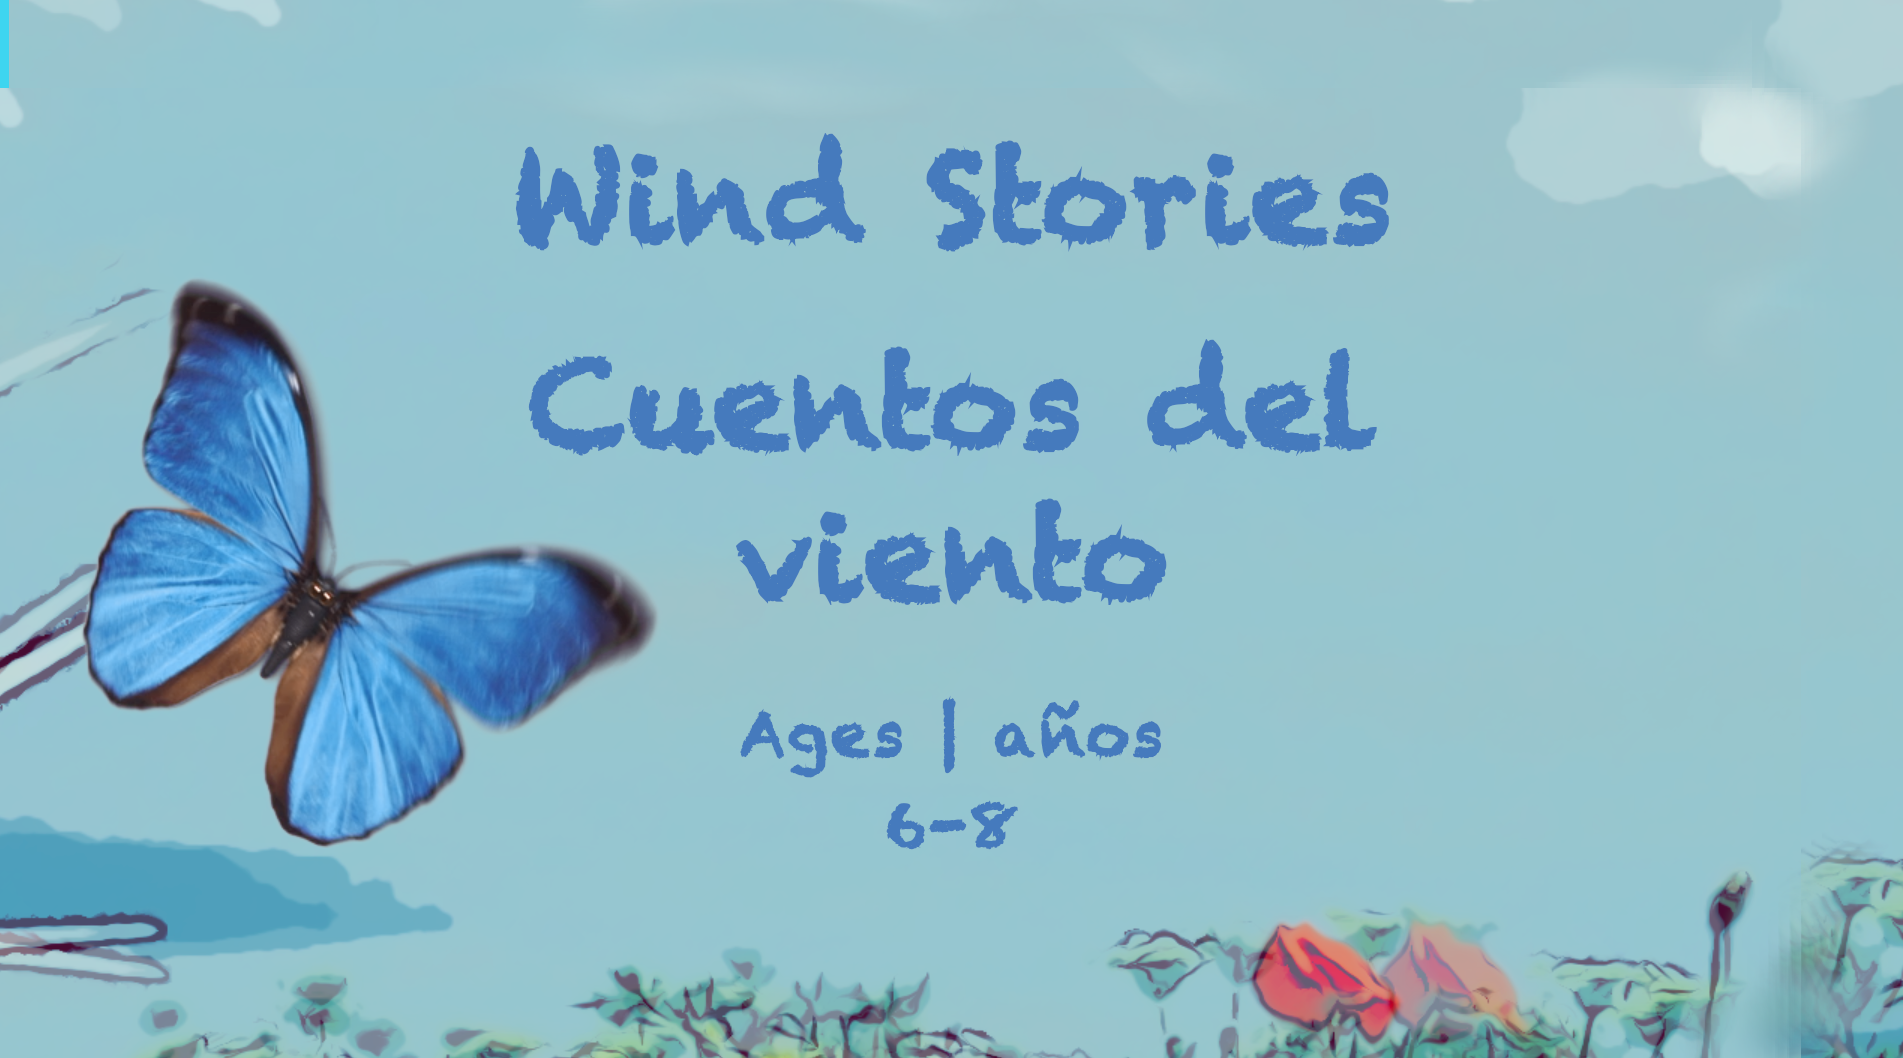 Wind Stories for 6-8 year olds